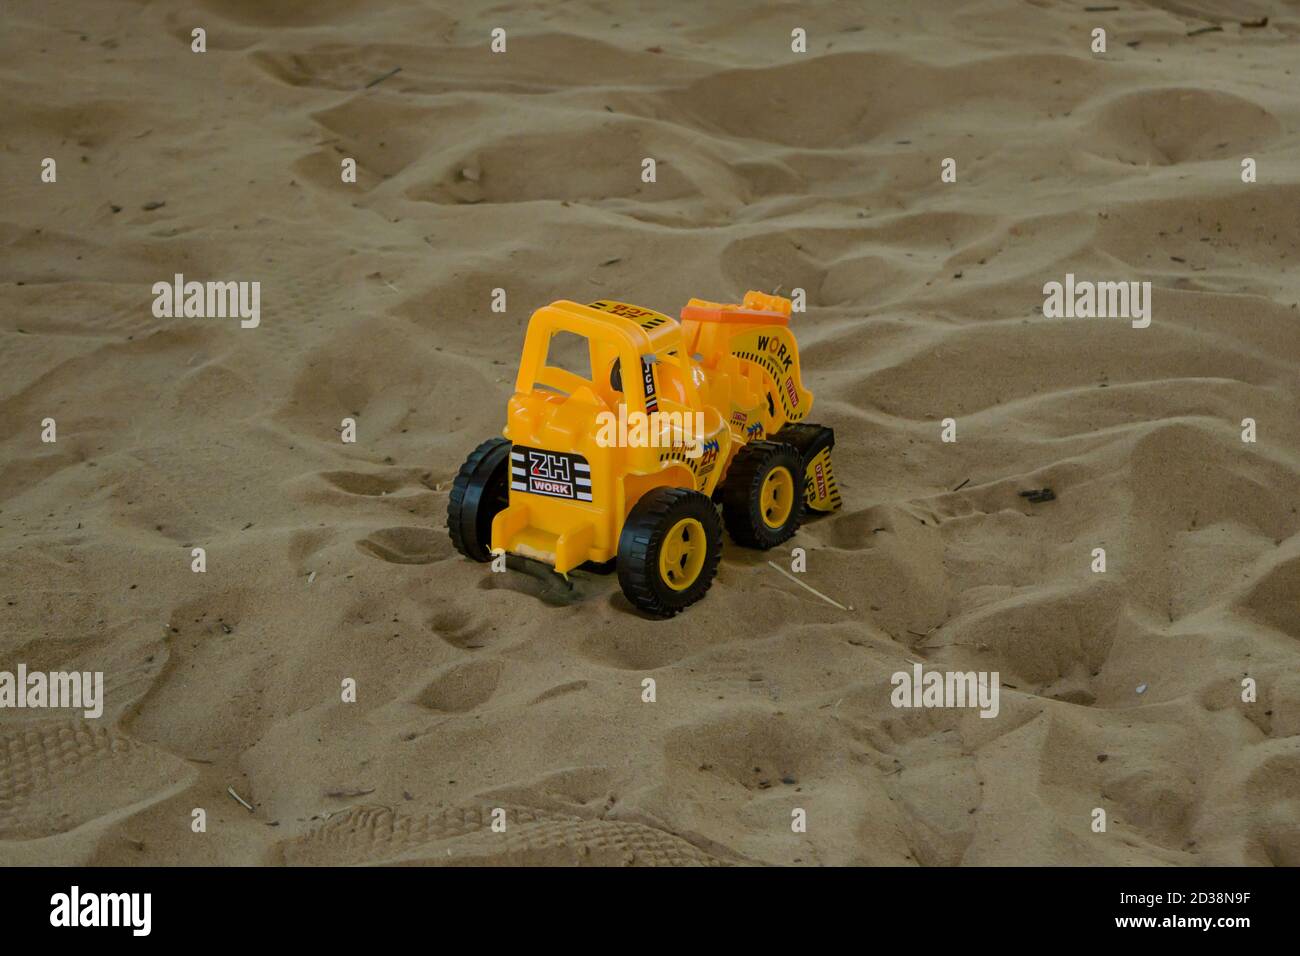 JCB Toy working on send, Construction Toys Stock Photo